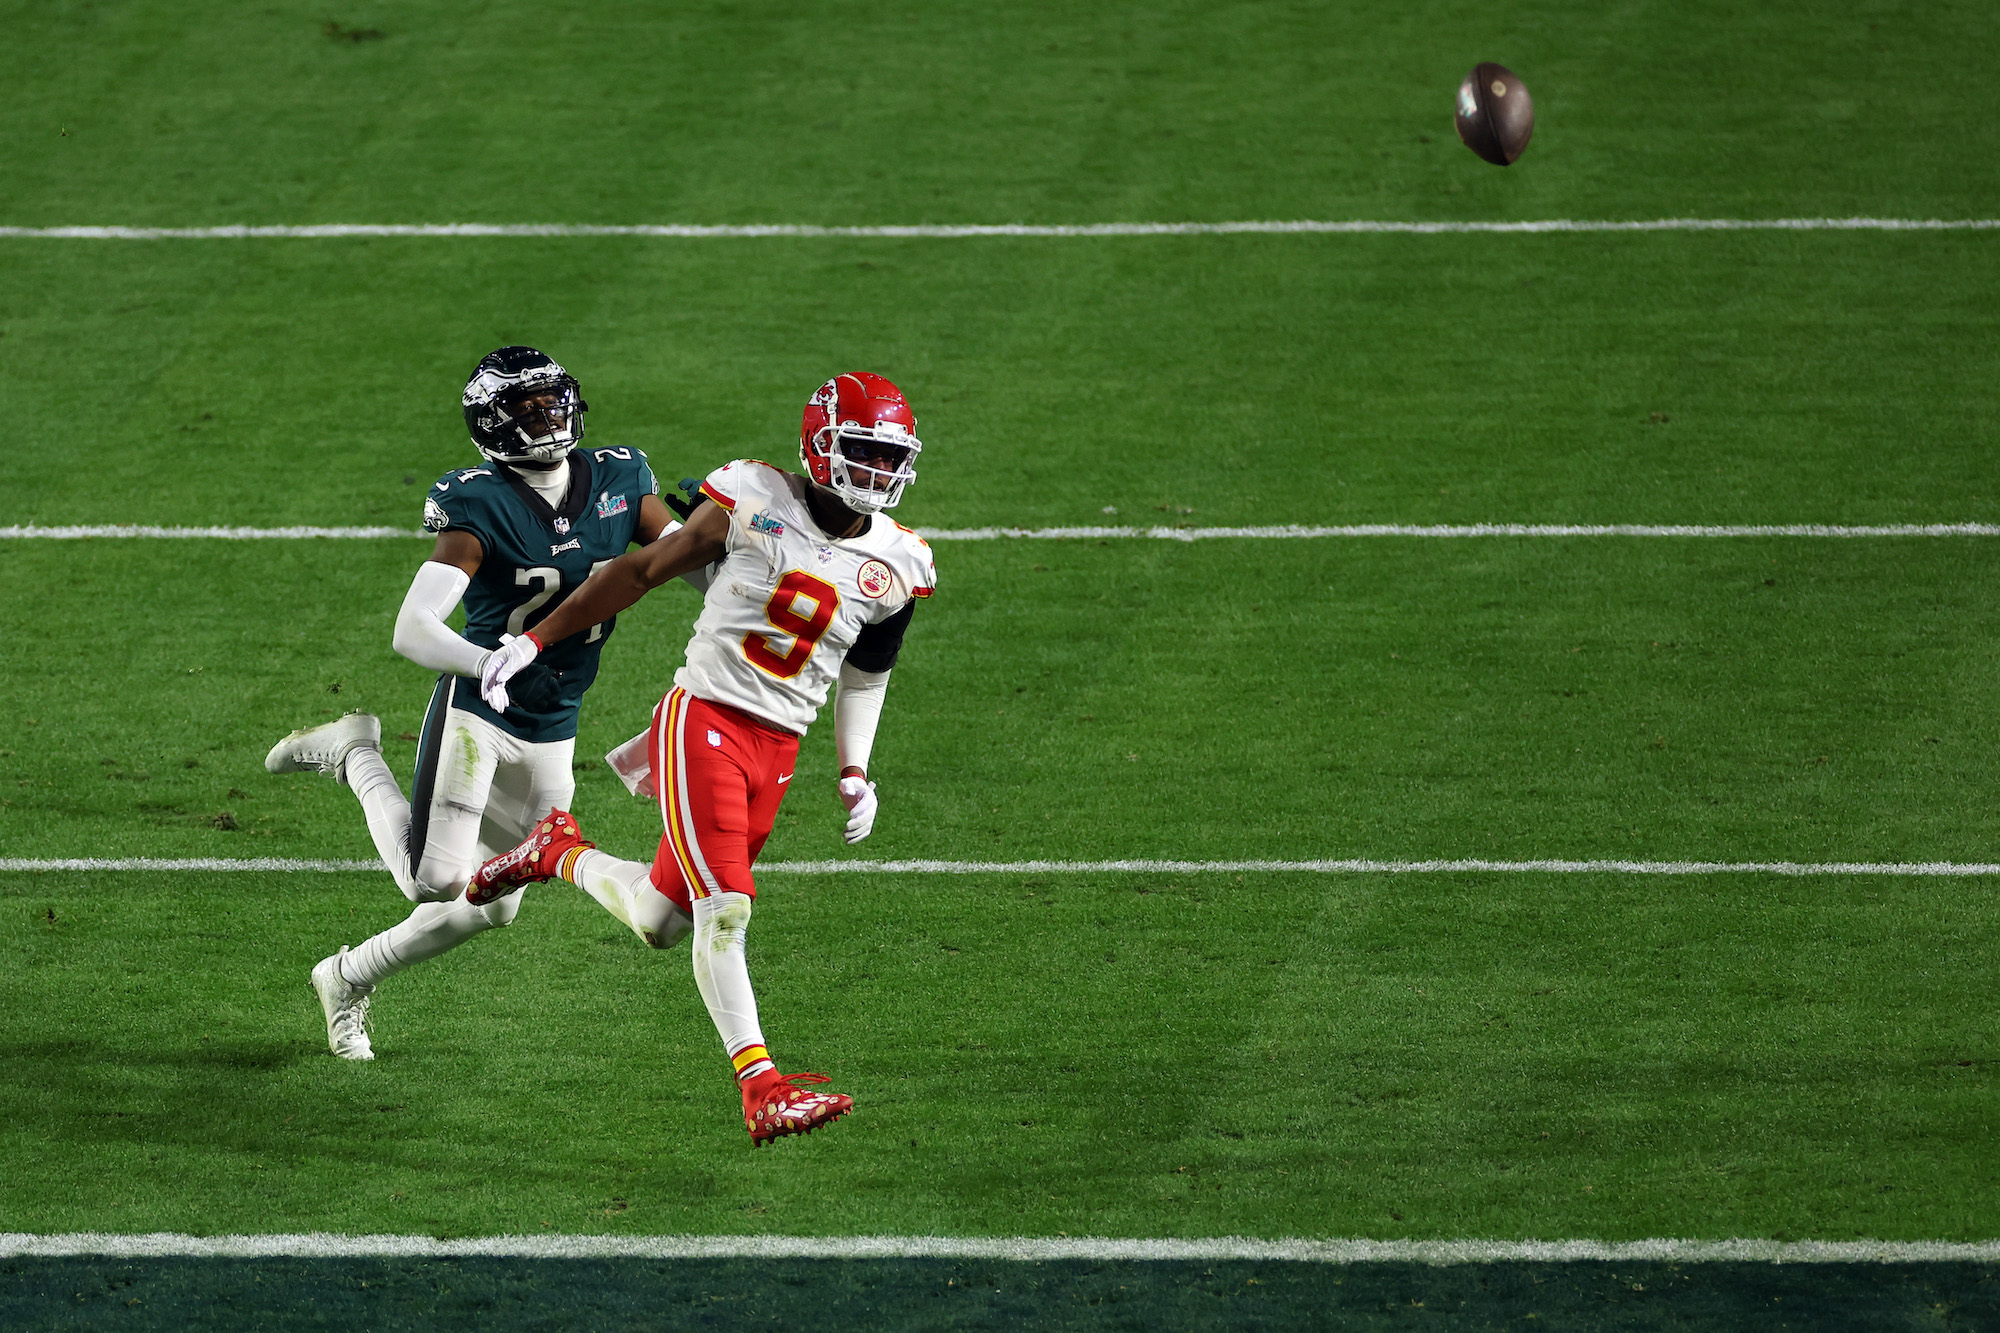 GLENDALE, ARIZONA - FEBRUARY 12: James Bradberry #24 of the Philadelphia Eagles is called for holding against JuJu Smith-Schuster #9 of the Kansas City Chiefs during the fourth quarter in Super Bowl LVII at State Farm Stadium on February 12, 2023 in Glendale, Arizona. (Photo by Sarah Stier/Getty Images)